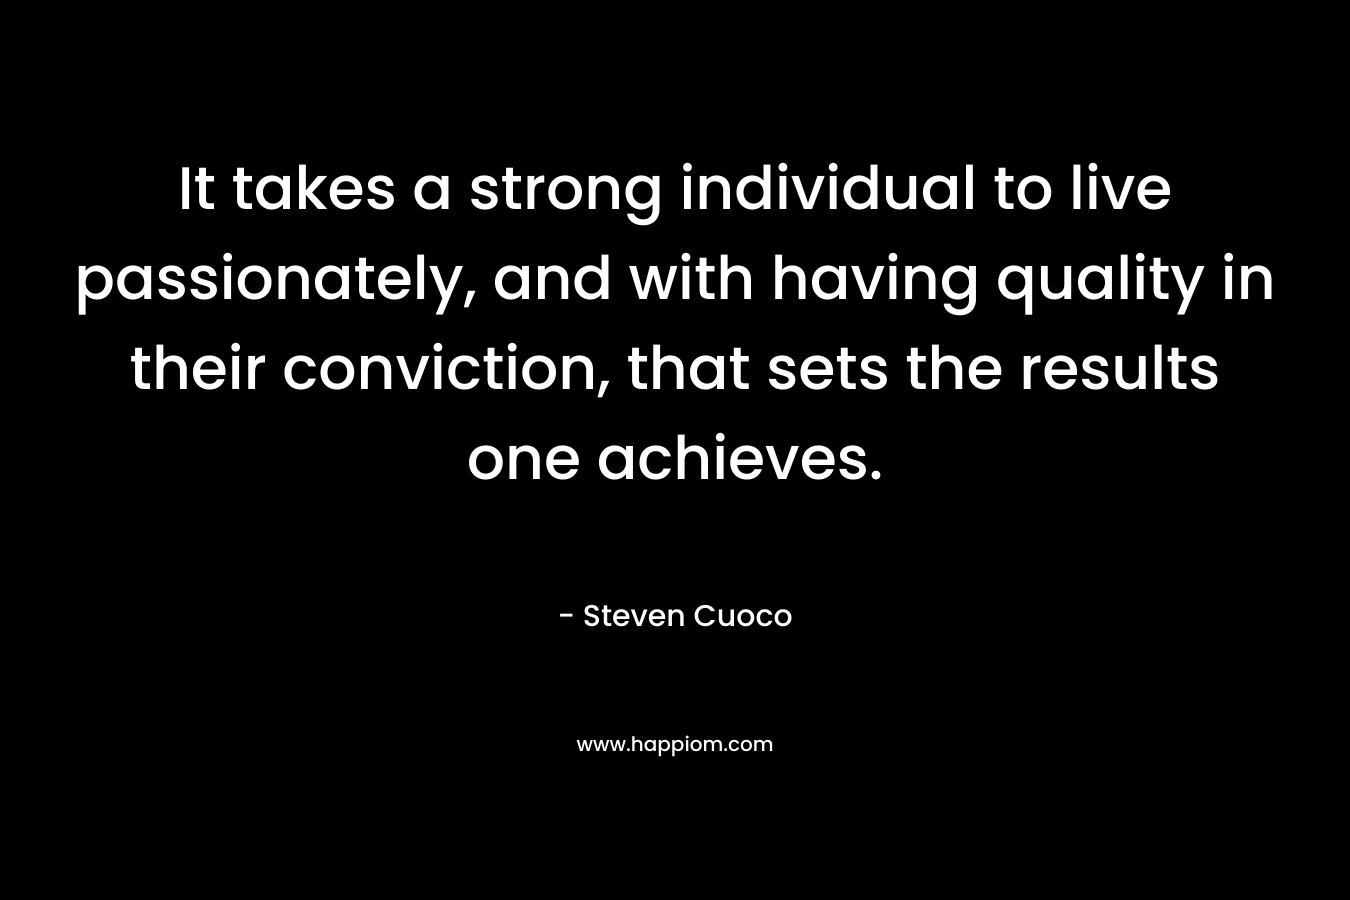 It takes a strong individual to live passionately, and with having quality in their conviction, that sets the results one achieves.